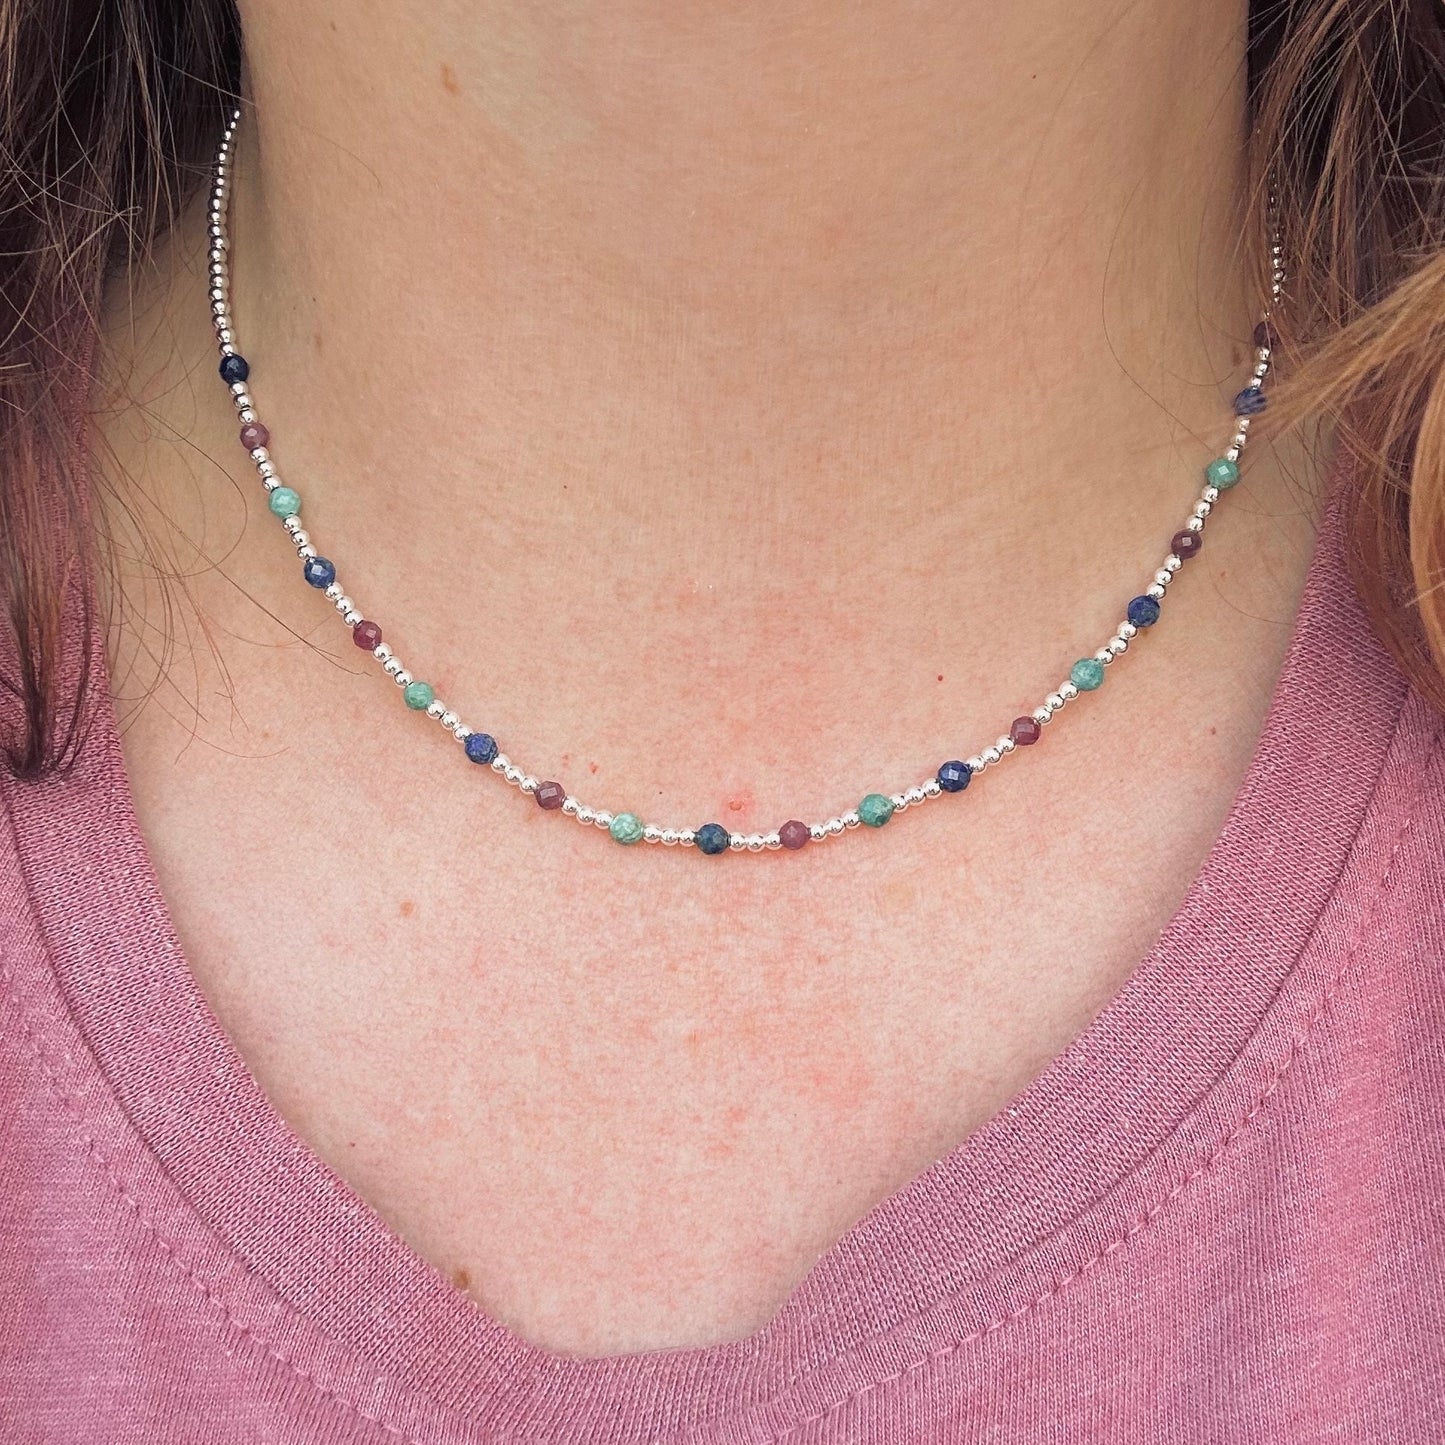 Dainty summer gemstone Necklace, Sterling Silver colourful necklace for summer holidays